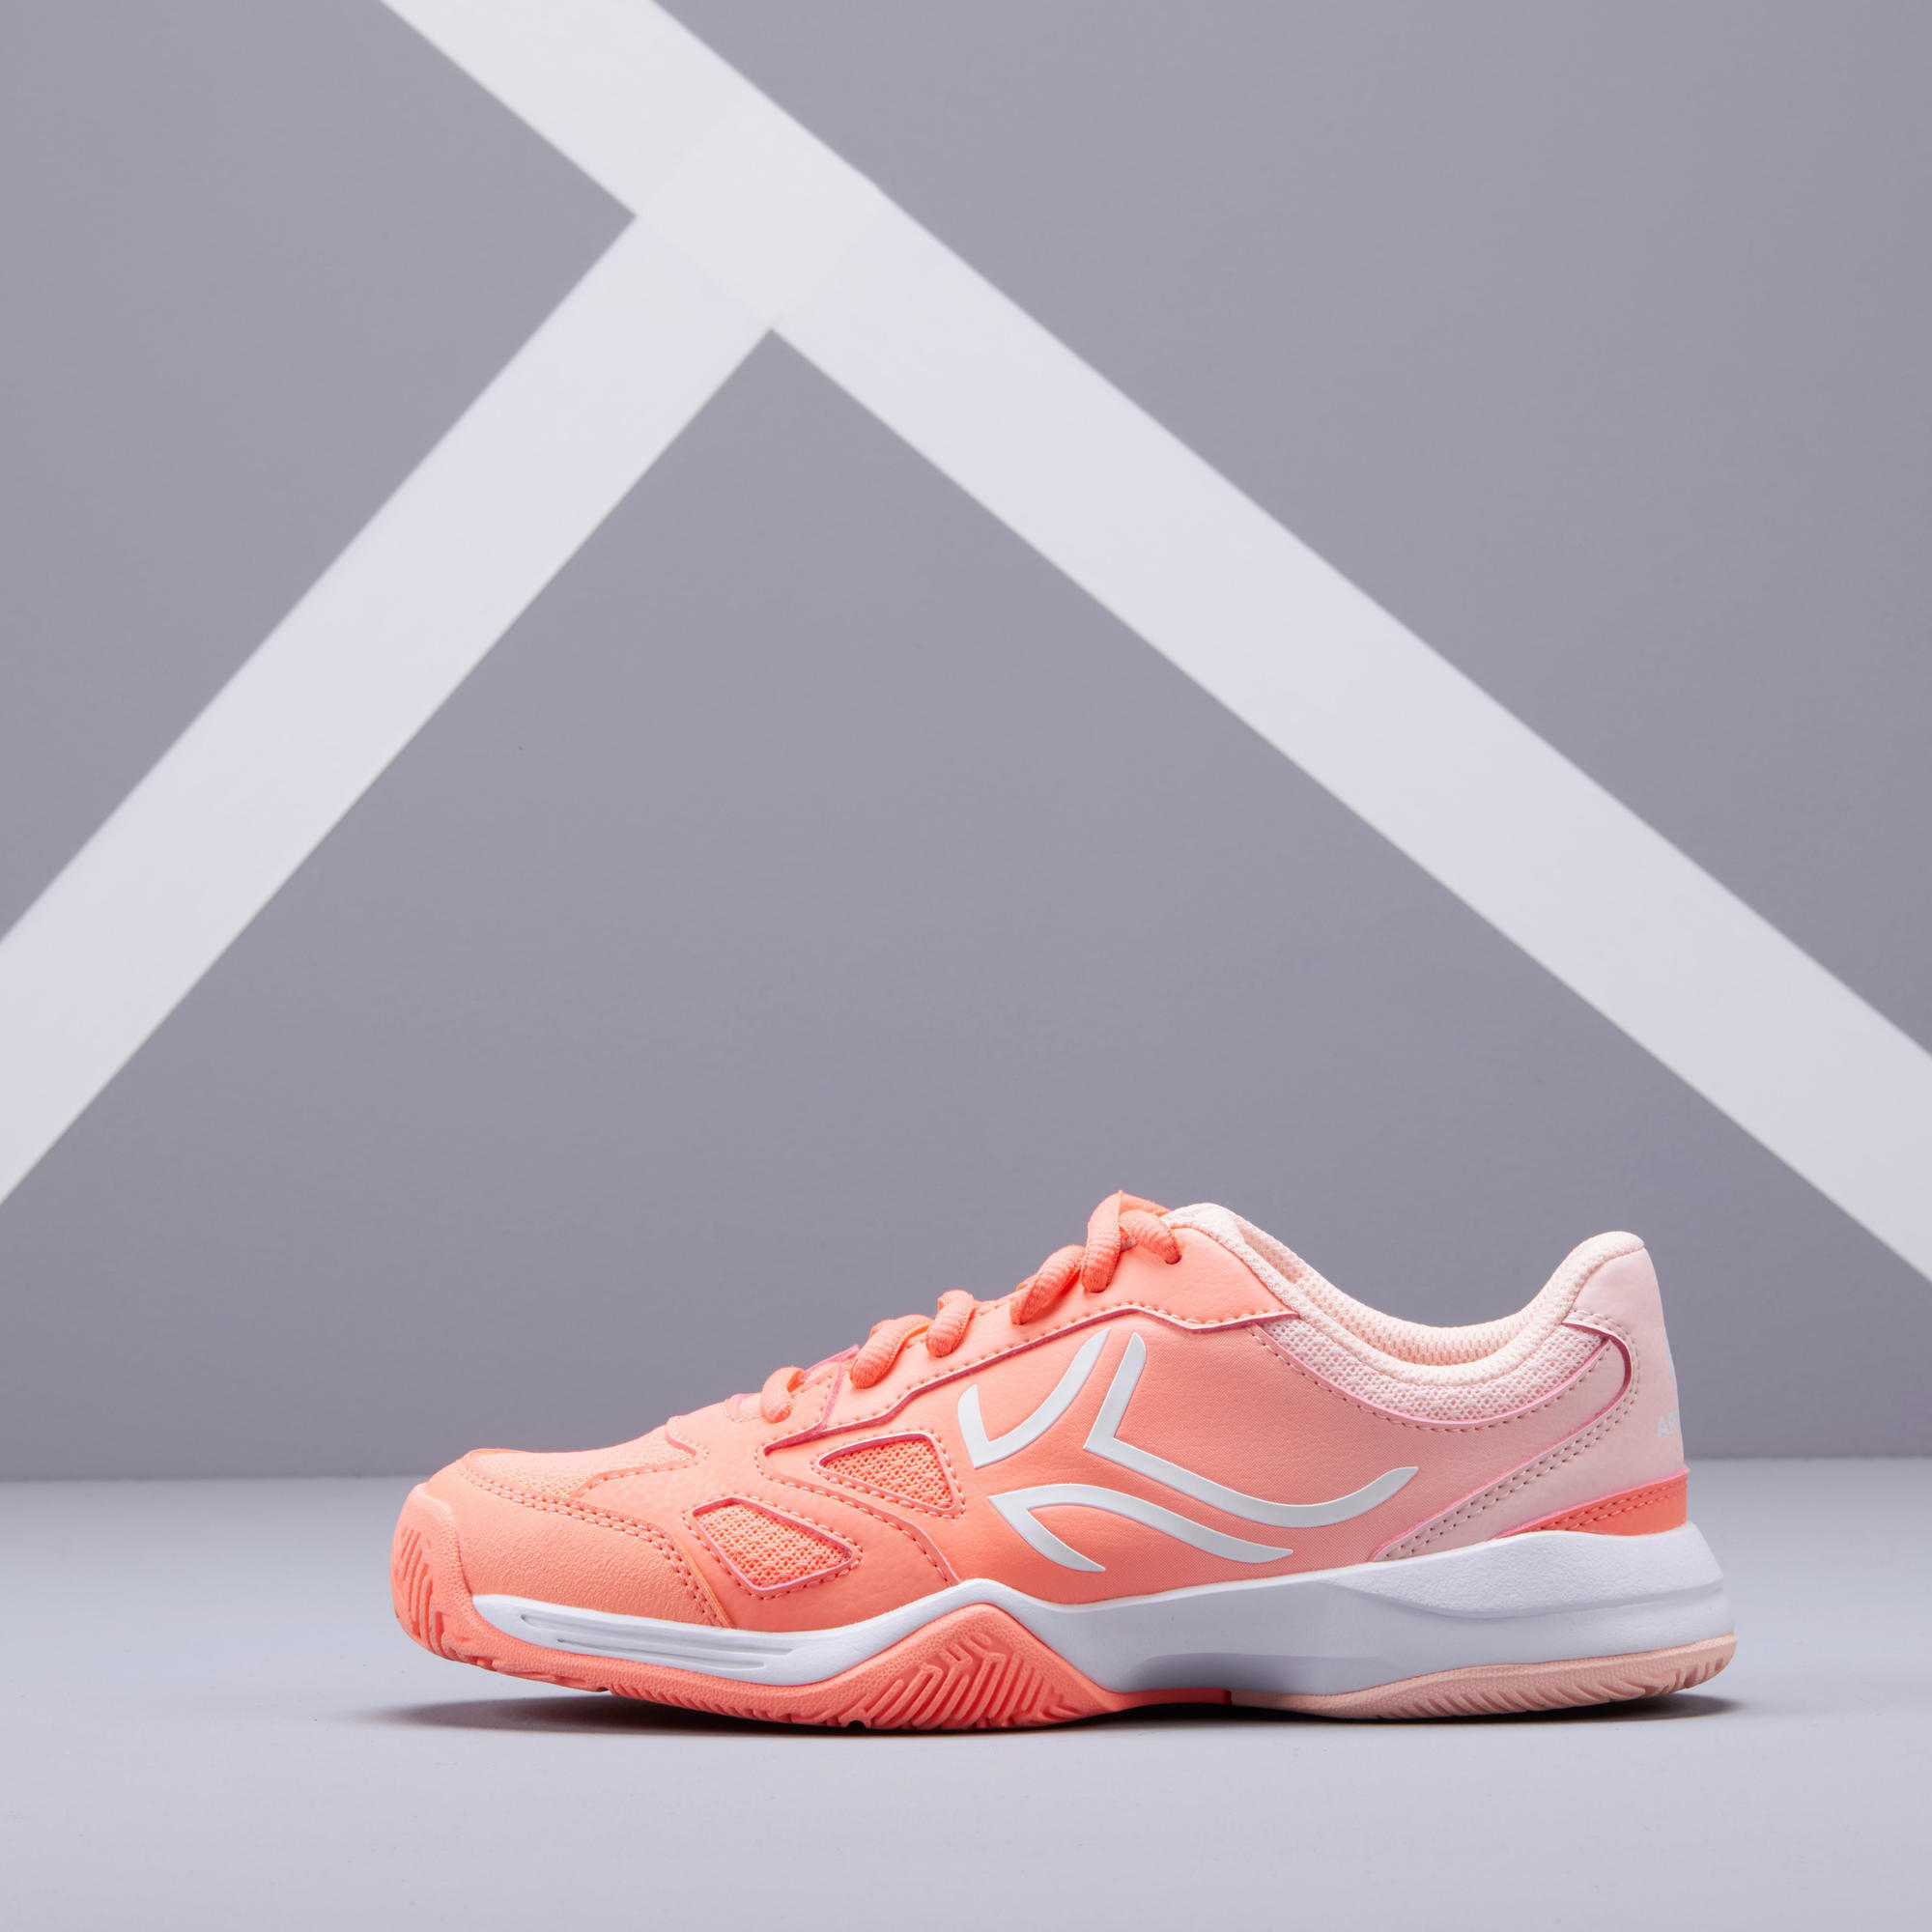 coral colored tennis shoes